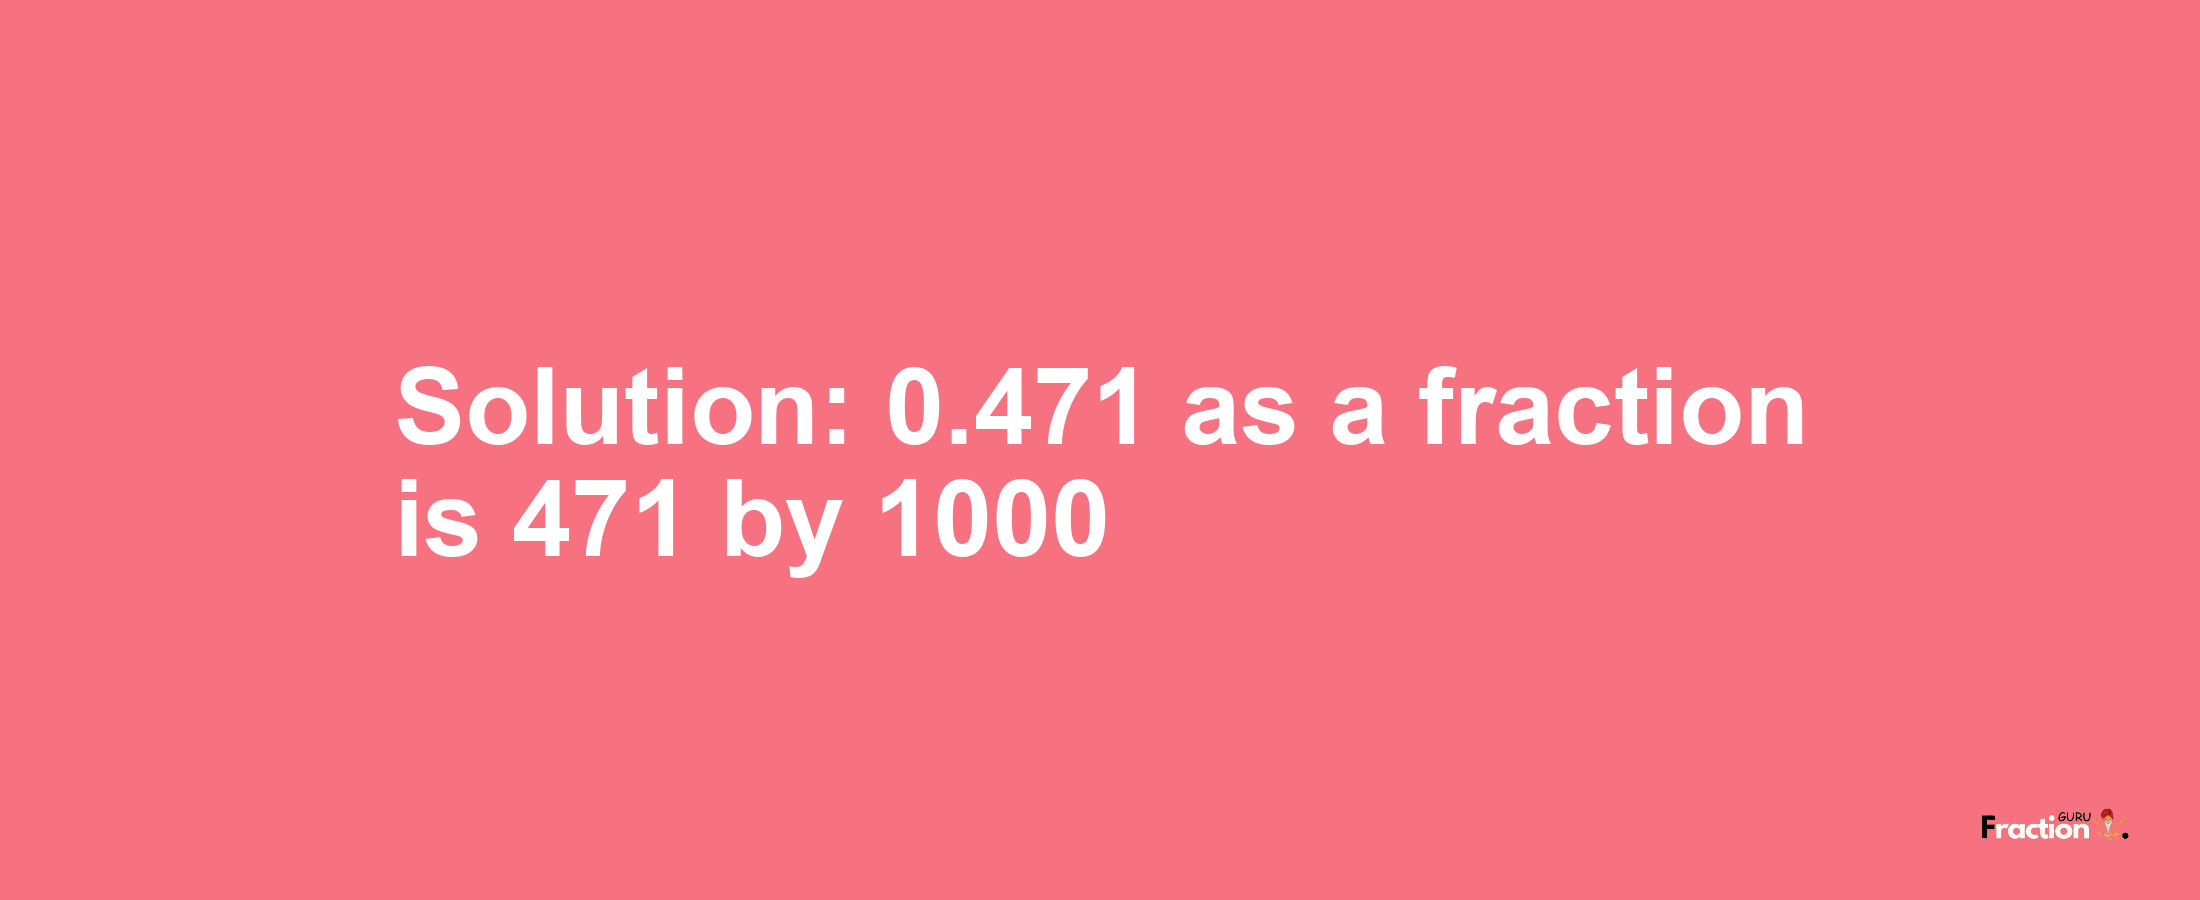 Solution:0.471 as a fraction is 471/1000